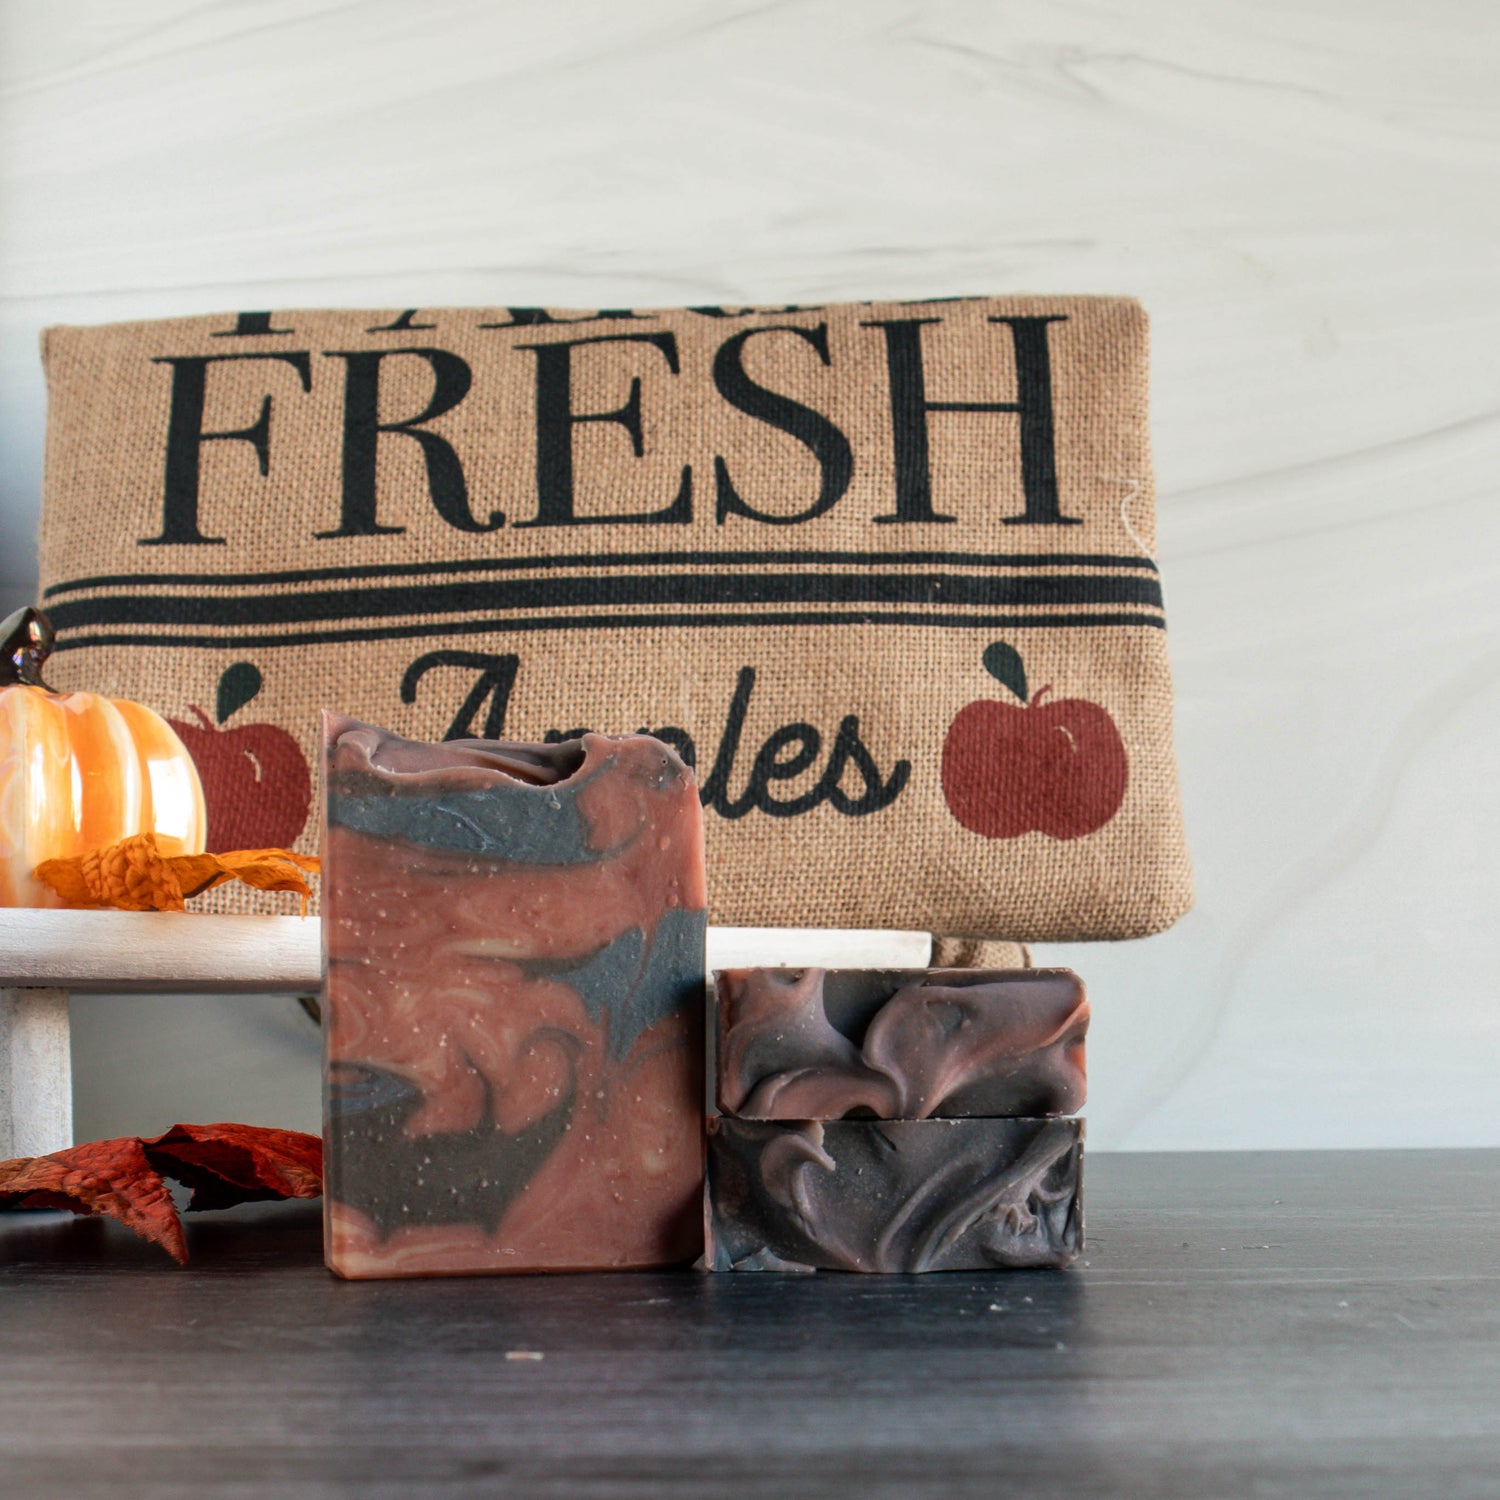 one apple cider oak goat milk soap is standing next to 2 others laying flat. The soap is a dark fire red with swirls of dark blue and black. there is a burlap apple sack in the background along with some pumpkins and leaves